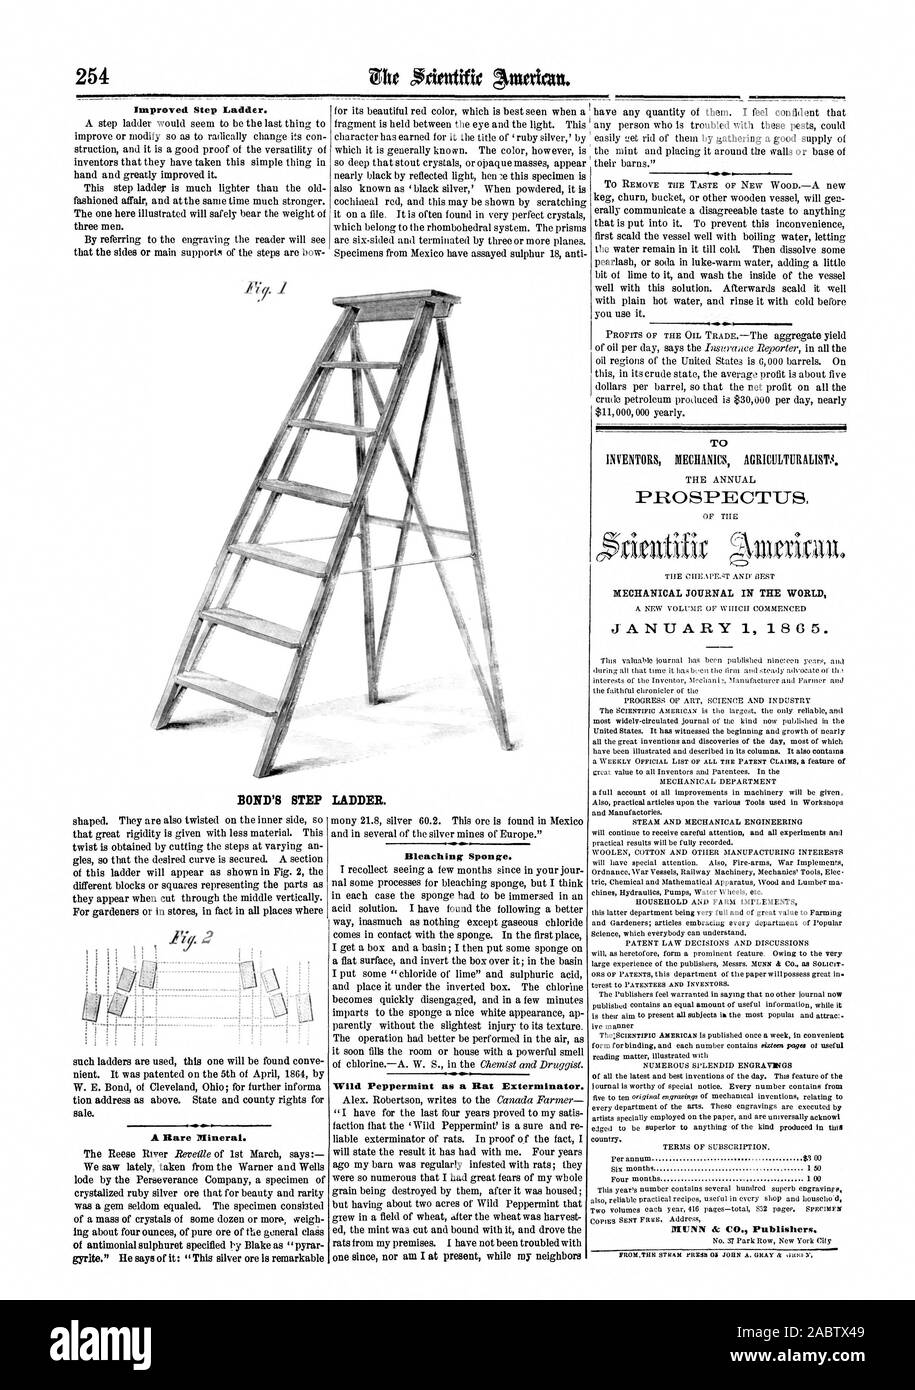 Improved Step Ladder. Bleaching Sponge. Wild Peppermint as a Rat Exterminator. T MECHANICAL JOURNAL IN THE WORLD BOND'S STEP LADDER., scientific american, 1865-04-15 Stock Photo